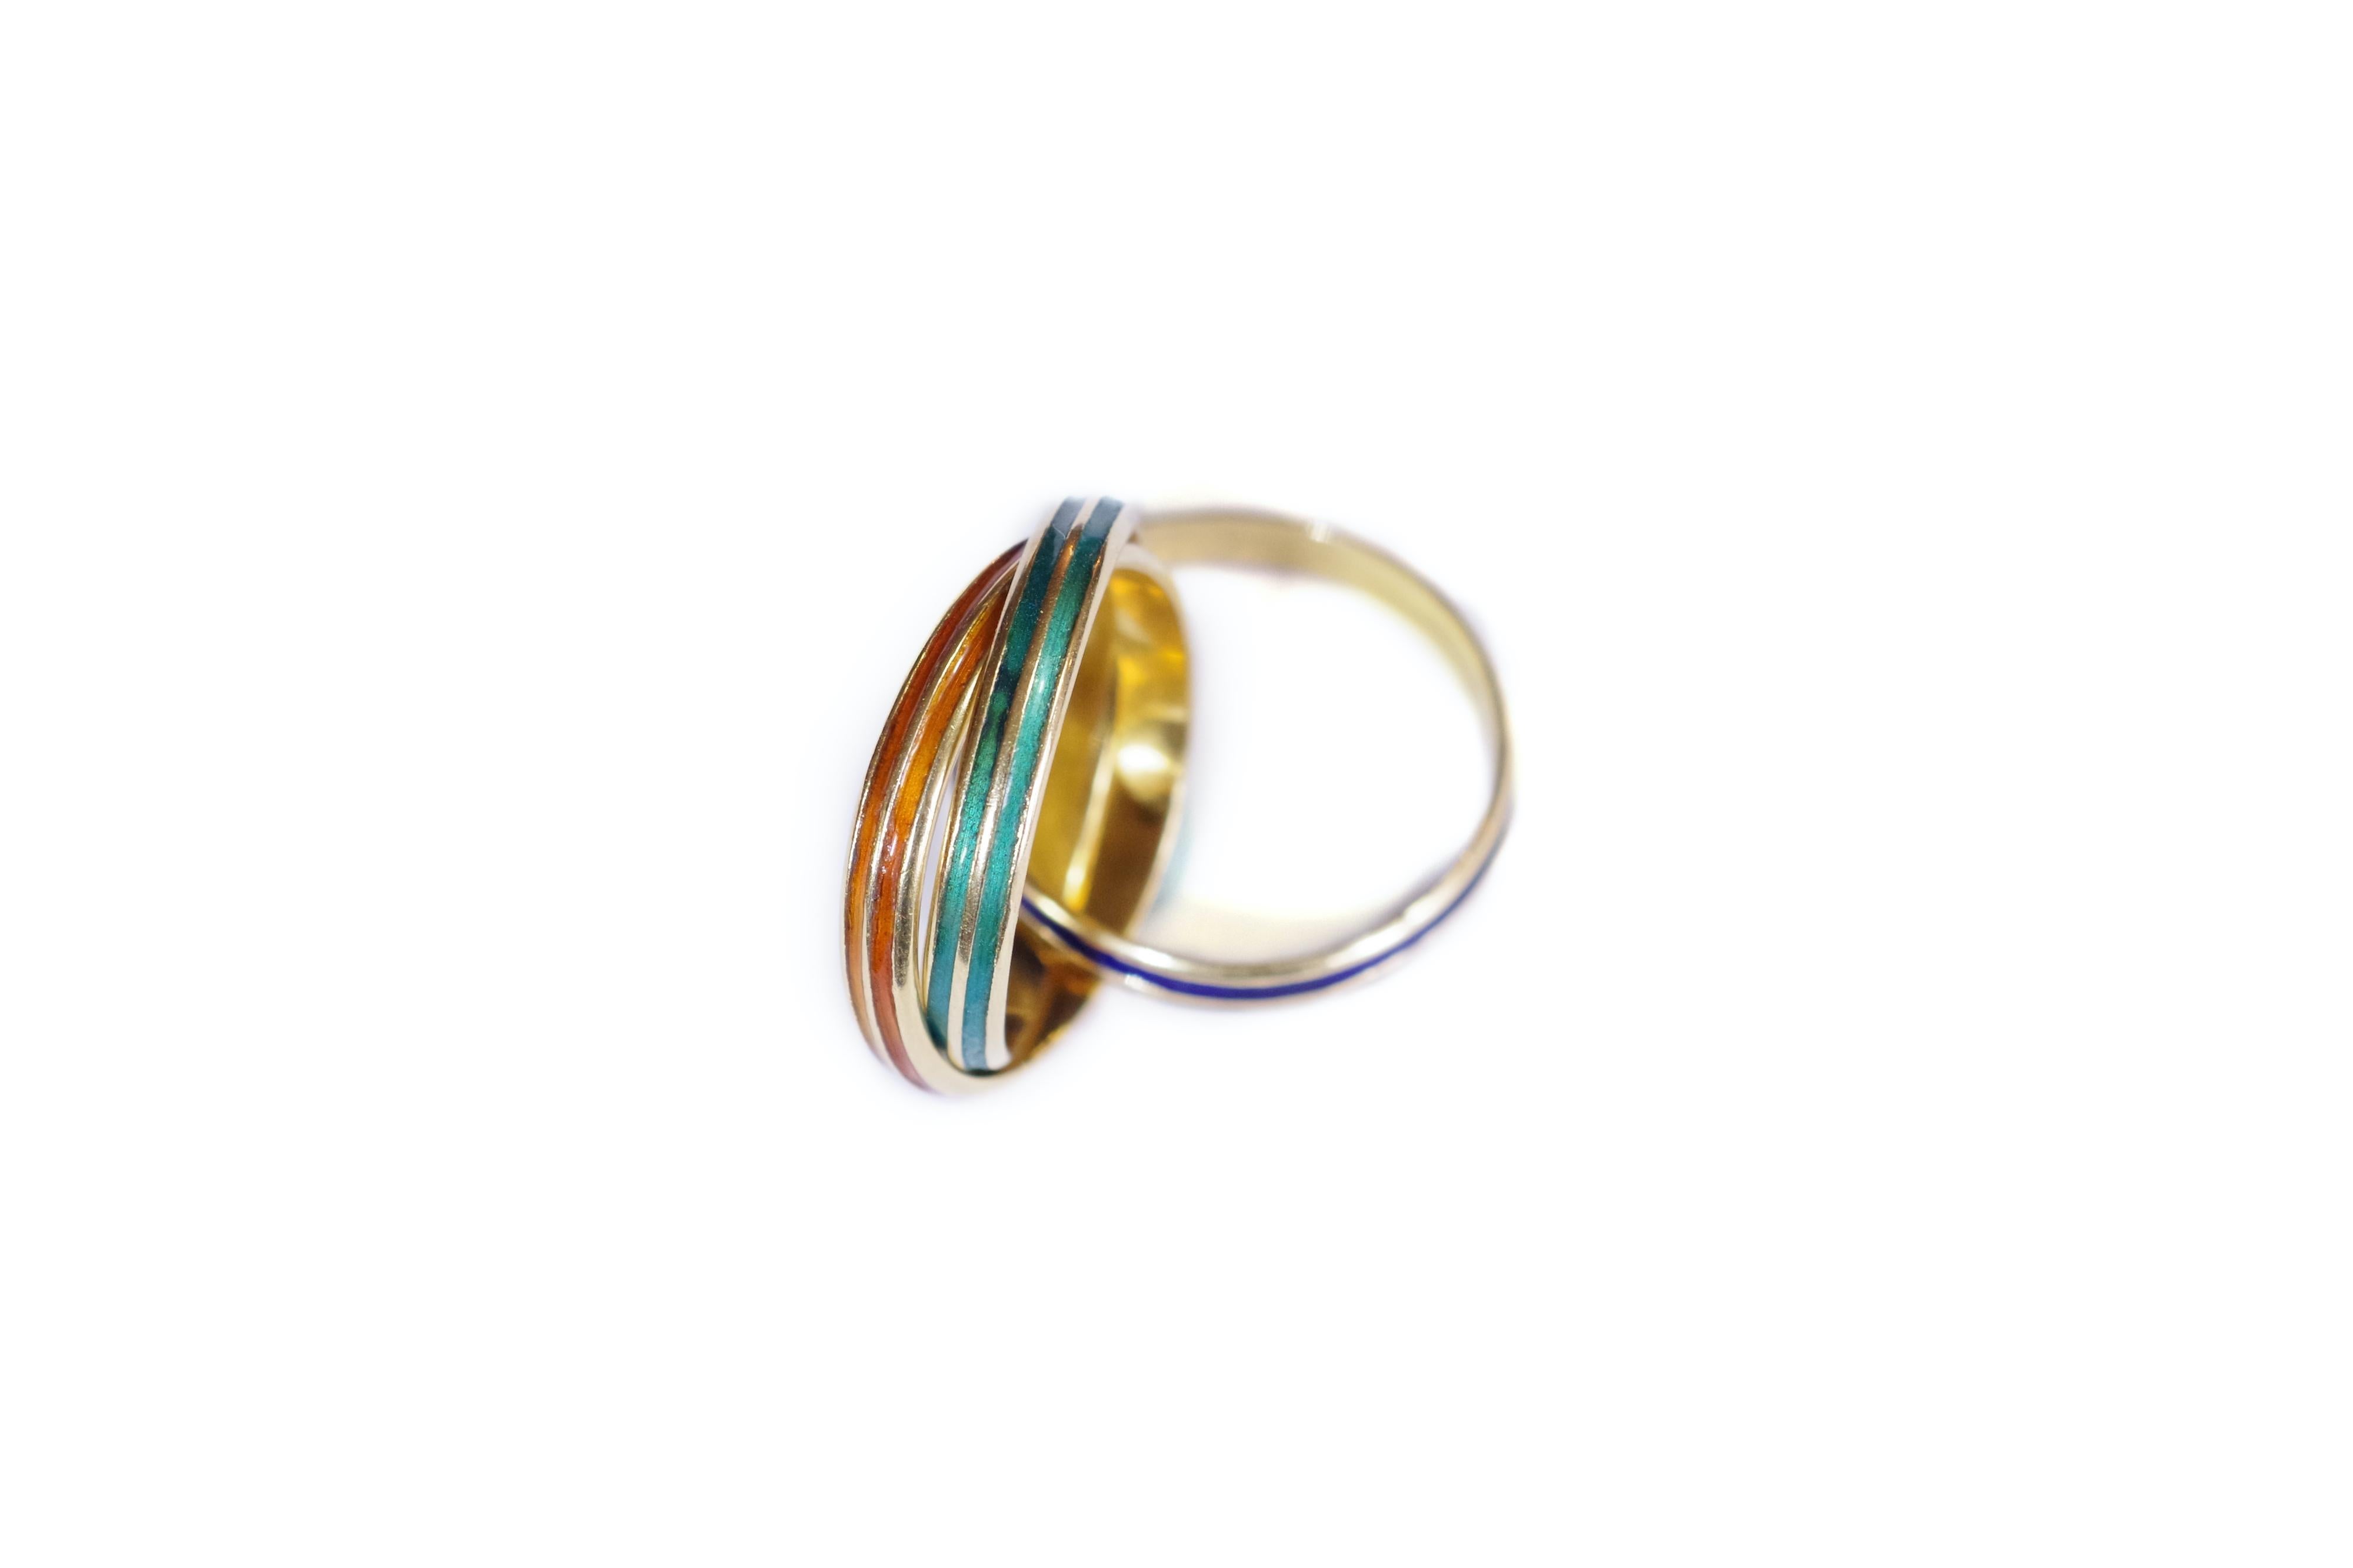 Cartier style Trinity enamel ring in yellow gold 18 karats. Ring with three rings in the style of the model 